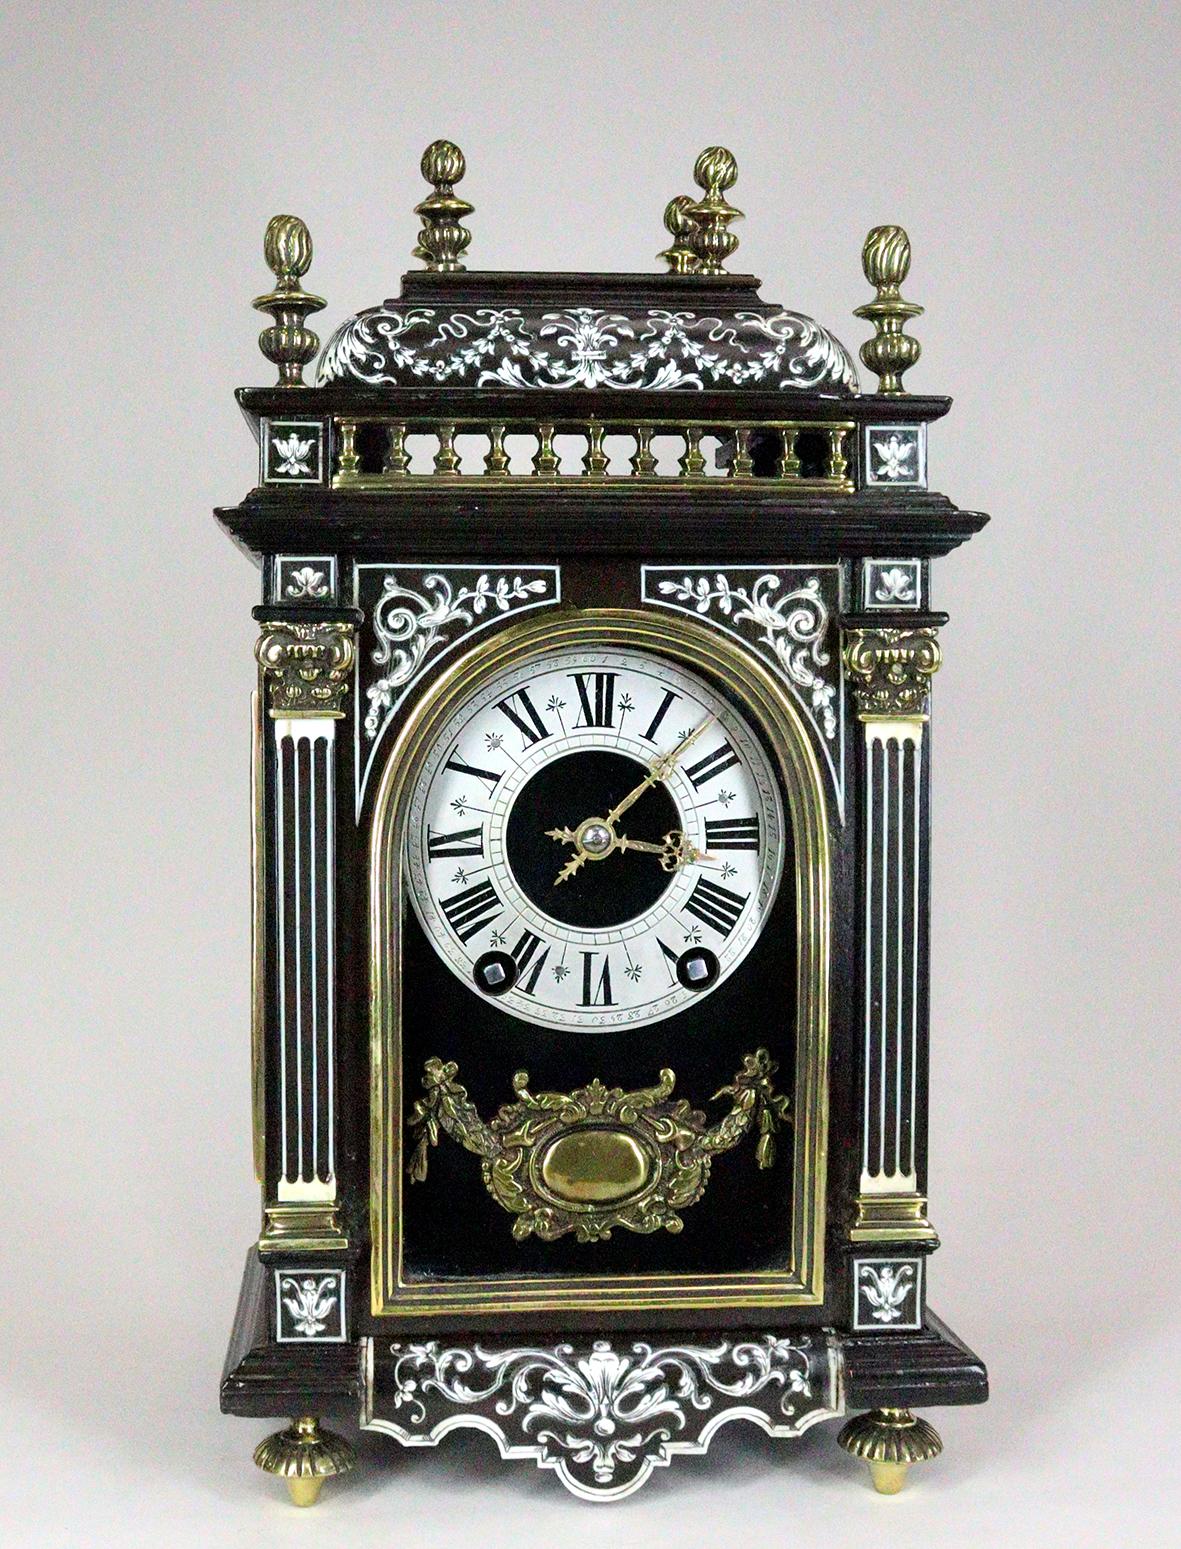 Miniature Ebonised Religieuse or Bracket Clock originally sold by Dent. With engraved bone inlay, brass finials and balustrading. In the manner of a 17th century baroque clock with brass chapter ring striking on a gong.

This clock has exquisite